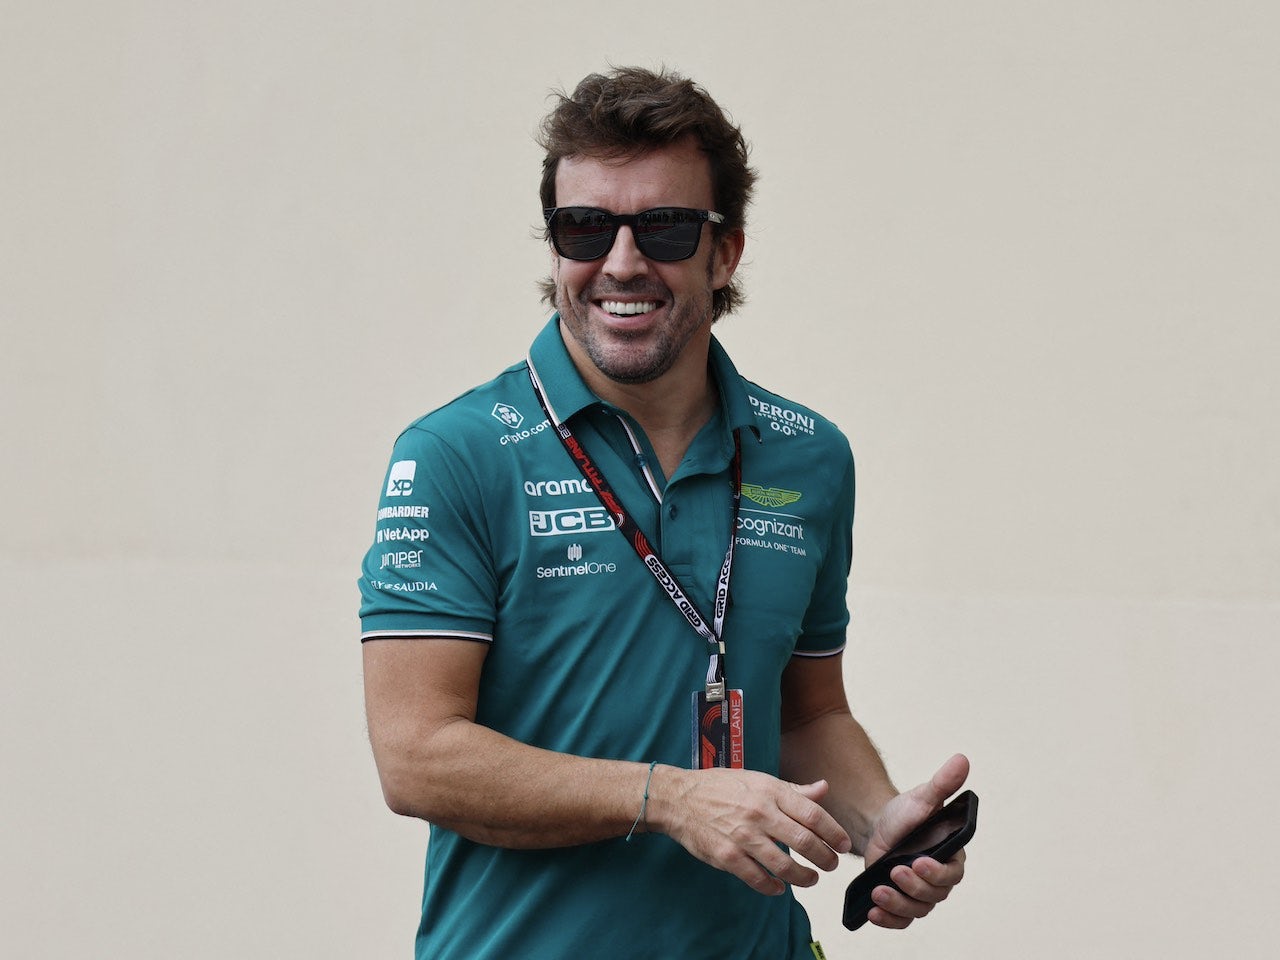 Rivals back Alonso over 'ridiculous' F1 test rules